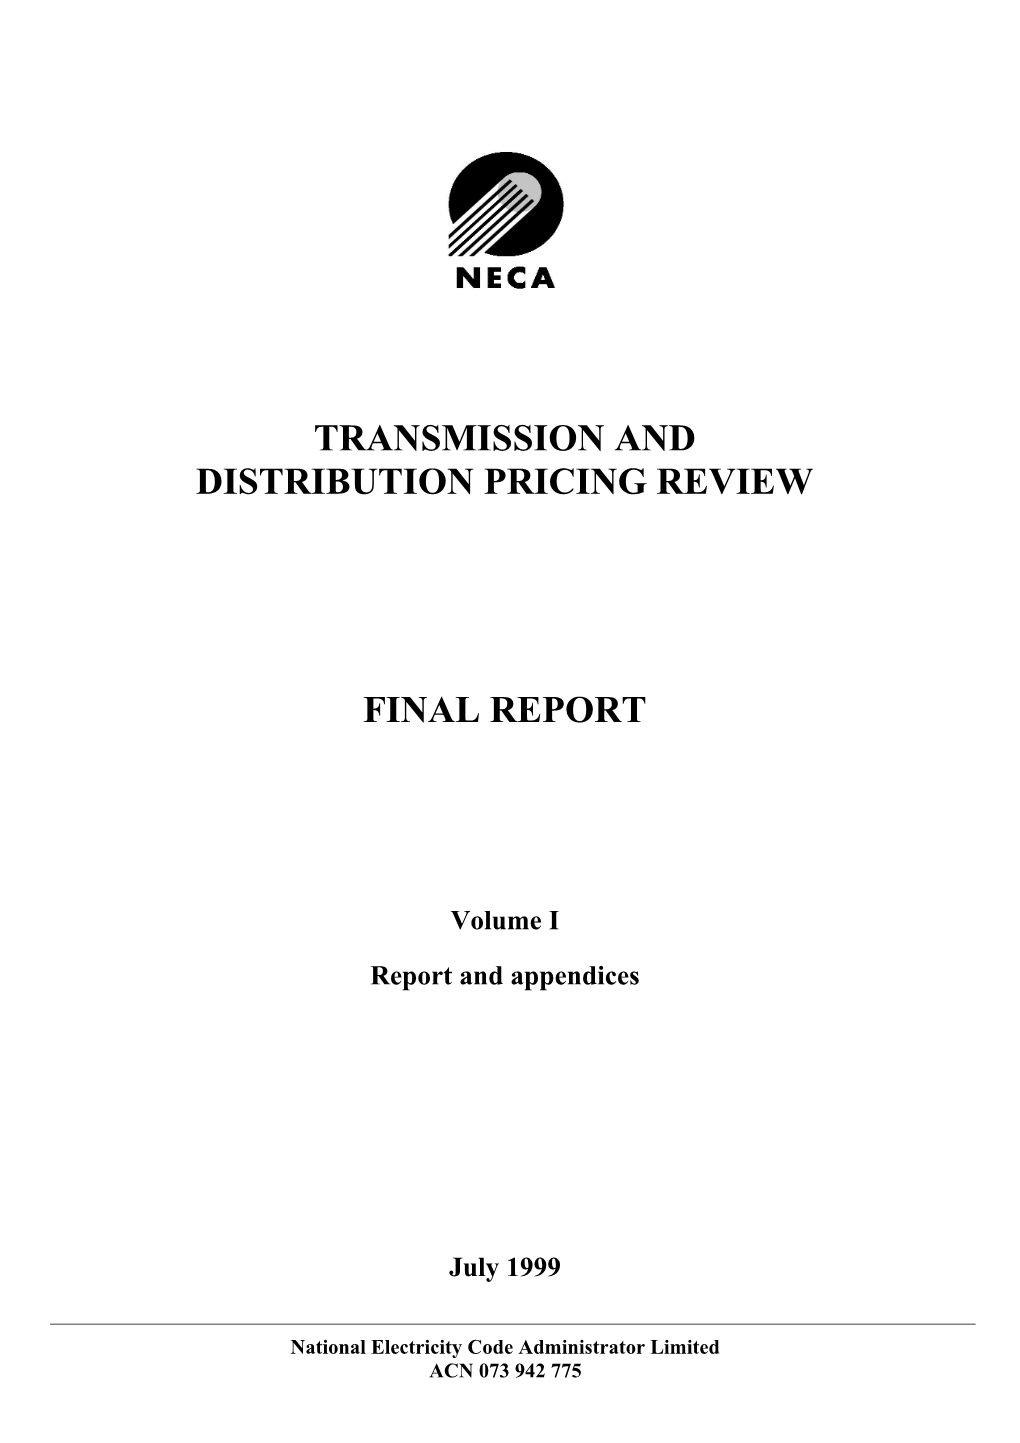 Transmission and Distribution Pricing Review